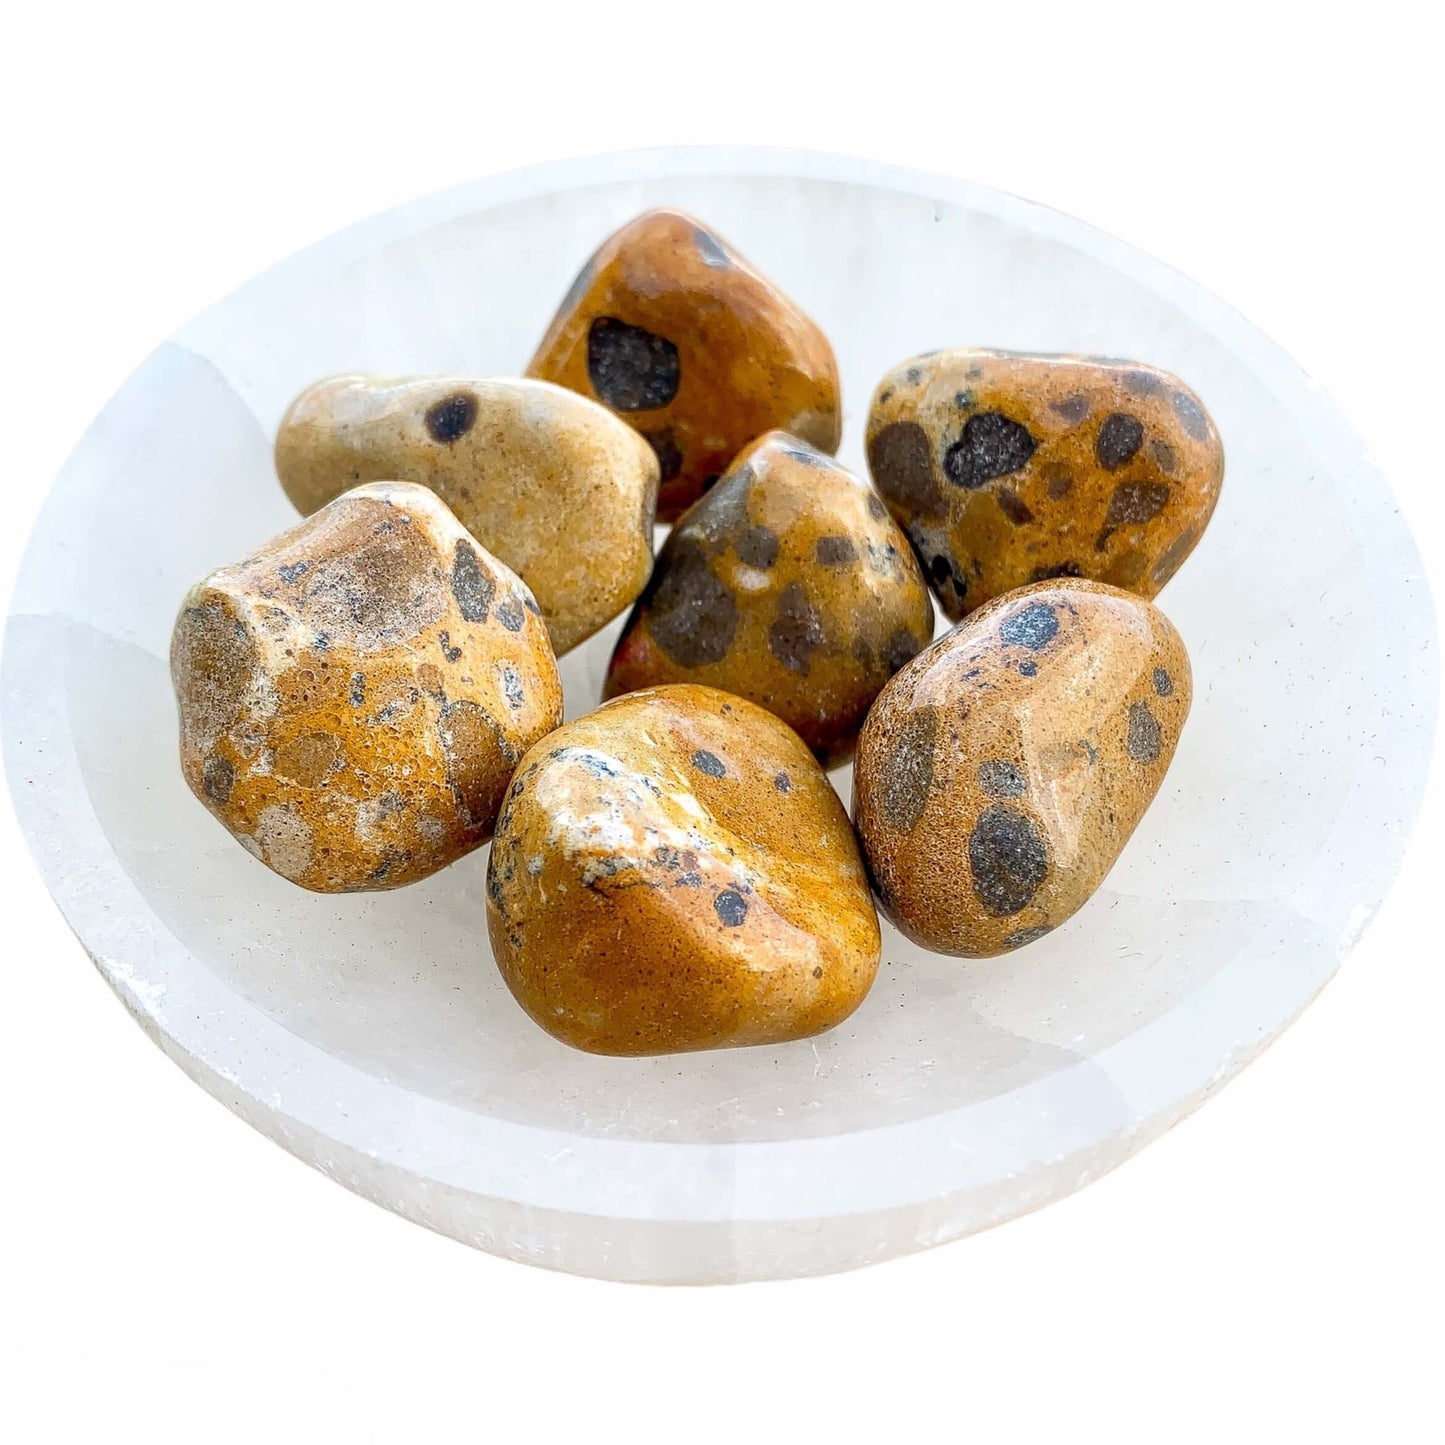 Looking for Leopard Skin Jasper Stone and Healing Crystals? Find Leopard Skin Jasper Polished Stone in Magic Crystals. Also known as Beown Rhyolite Natural Leopard Skin Jasper assists in self-healing and spiritual discovery to further personal growth. It is a powerful gemstone for stability, protection and grounding.